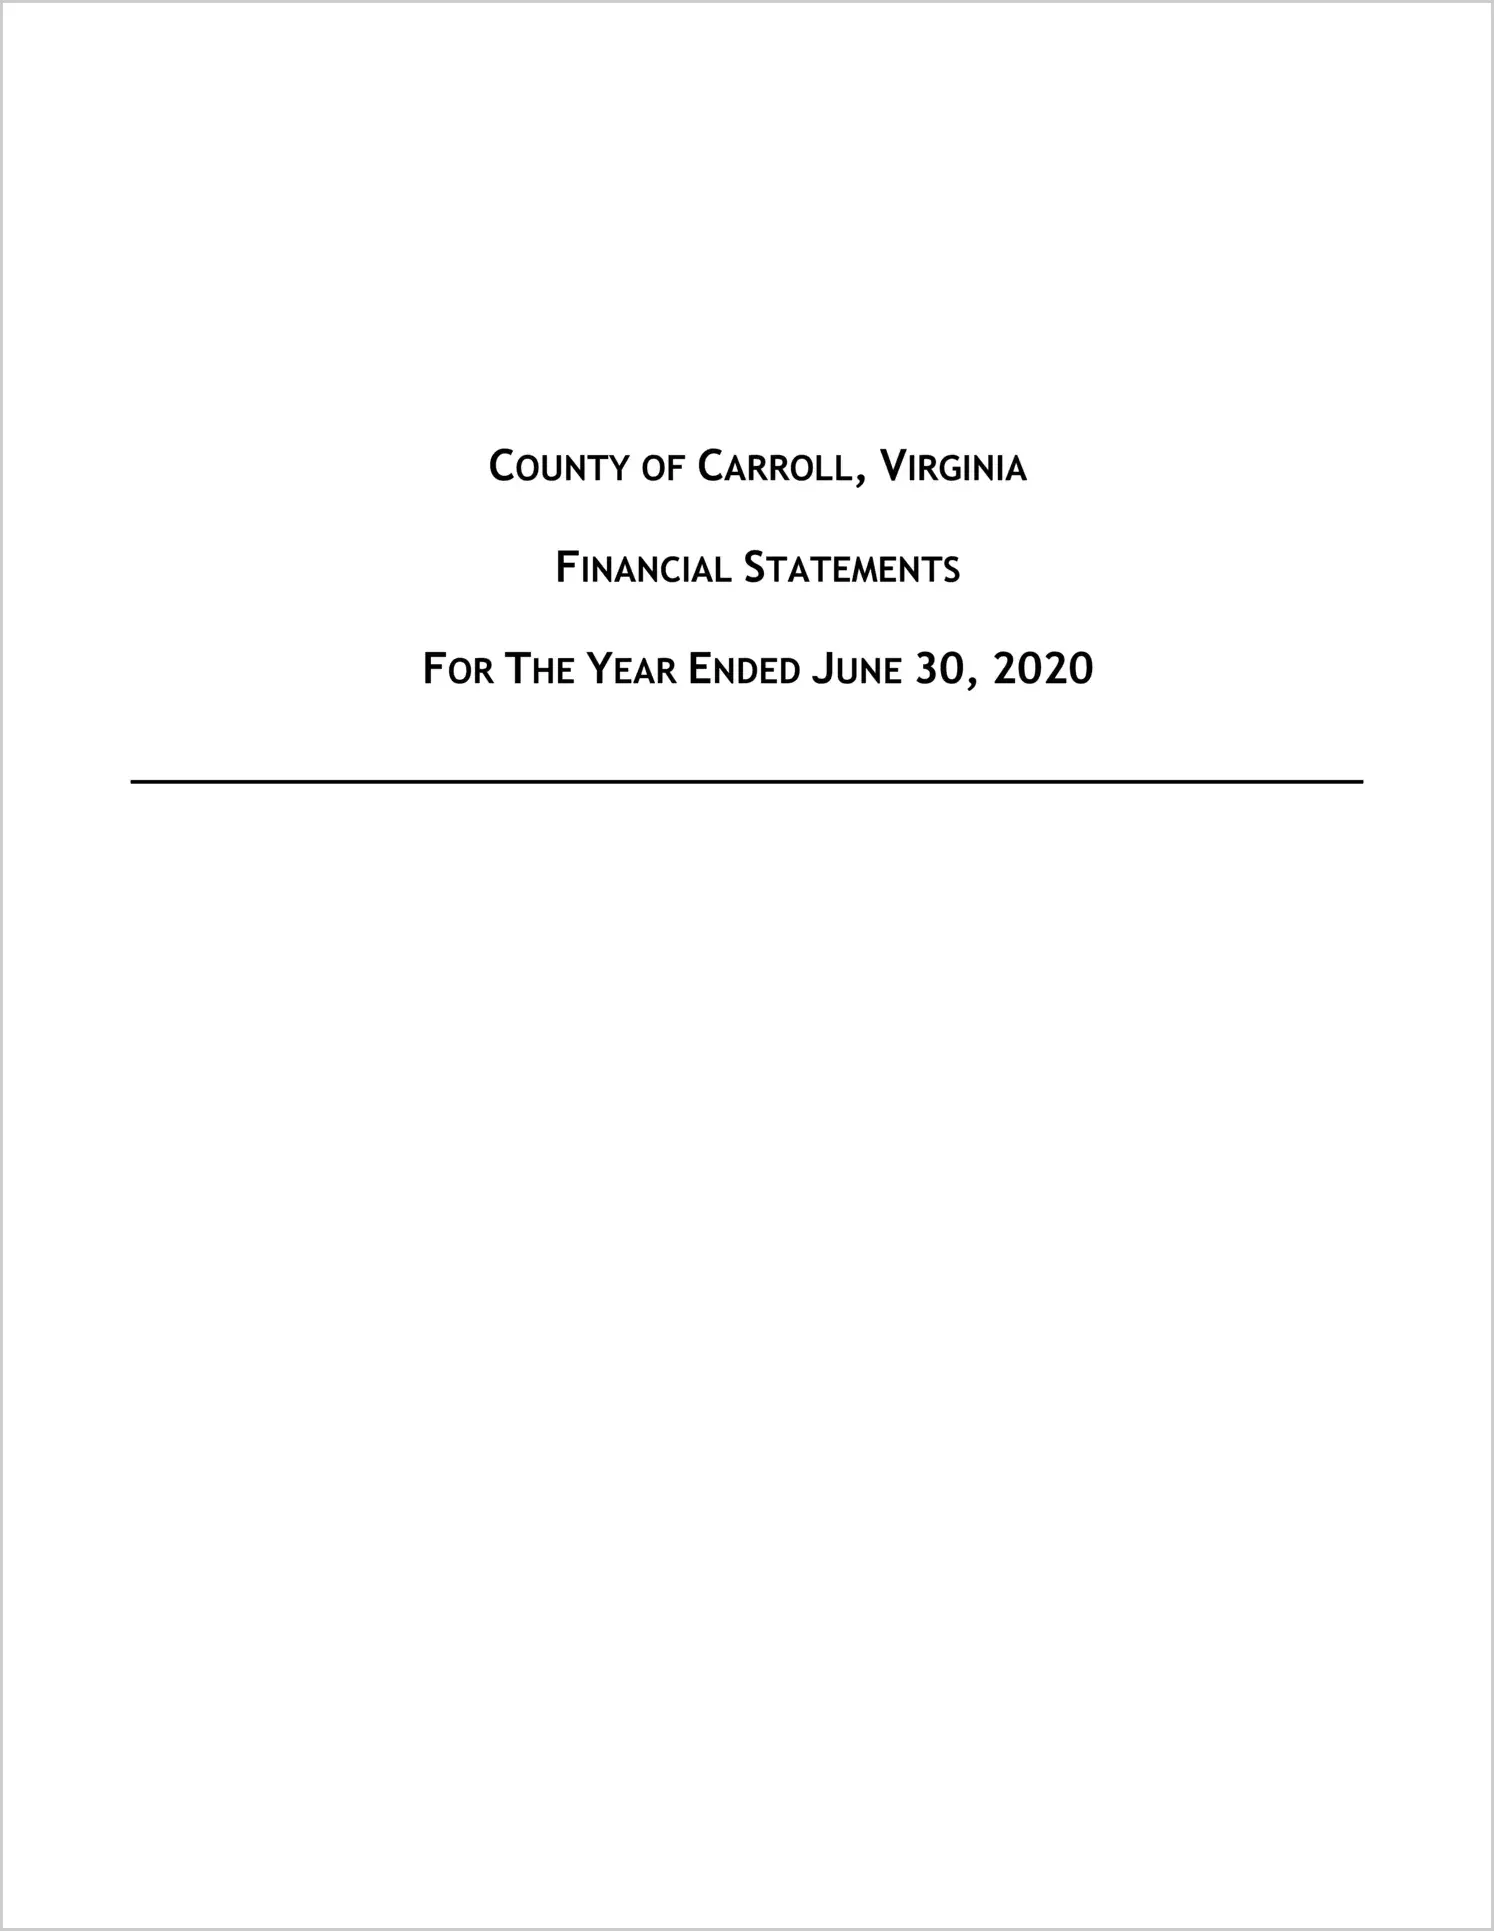 2020 Annual Financial Report for County of Carroll